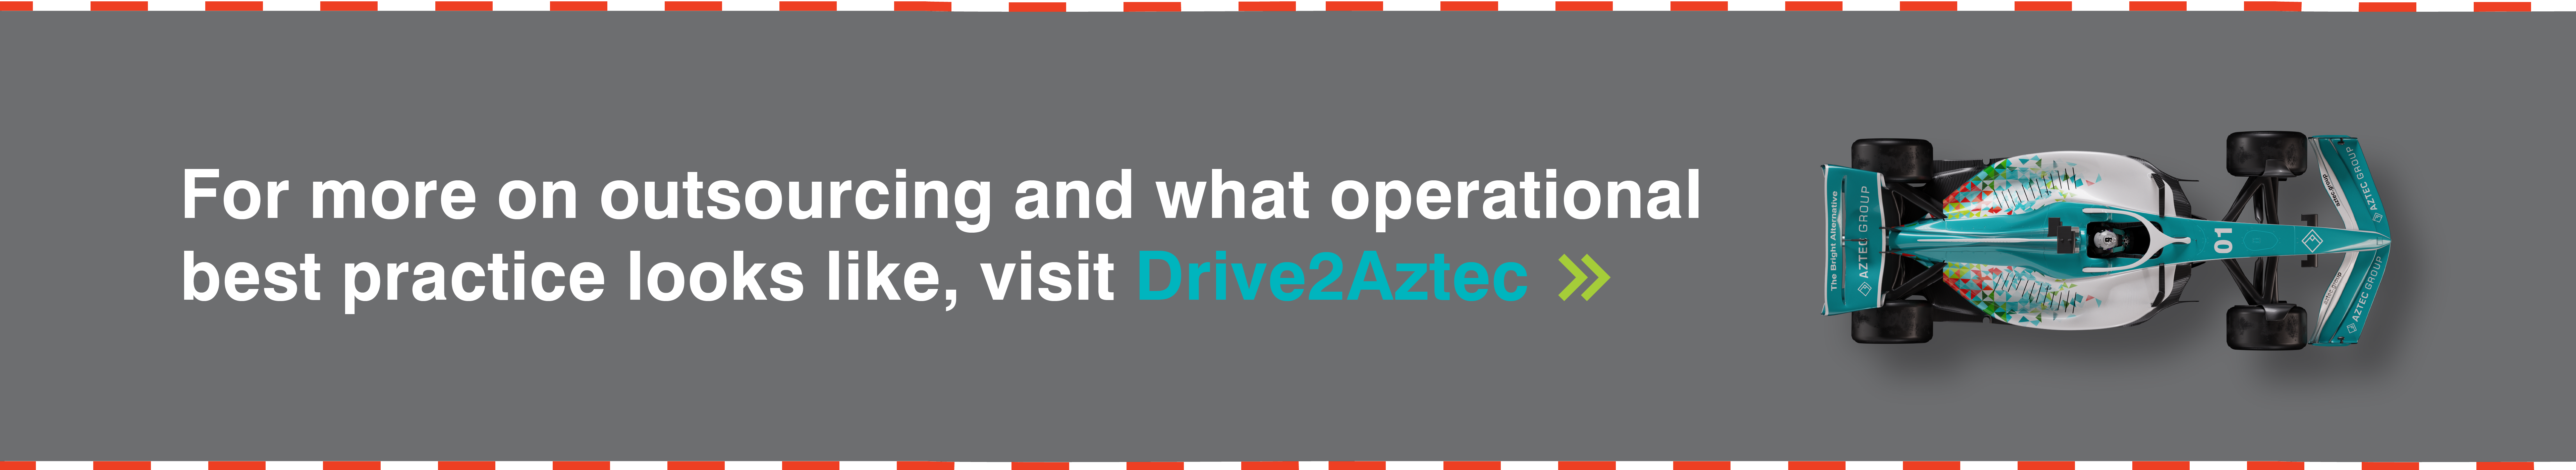 For more on outsourcing and what operational best practice looks like, visit Drive2Aztec